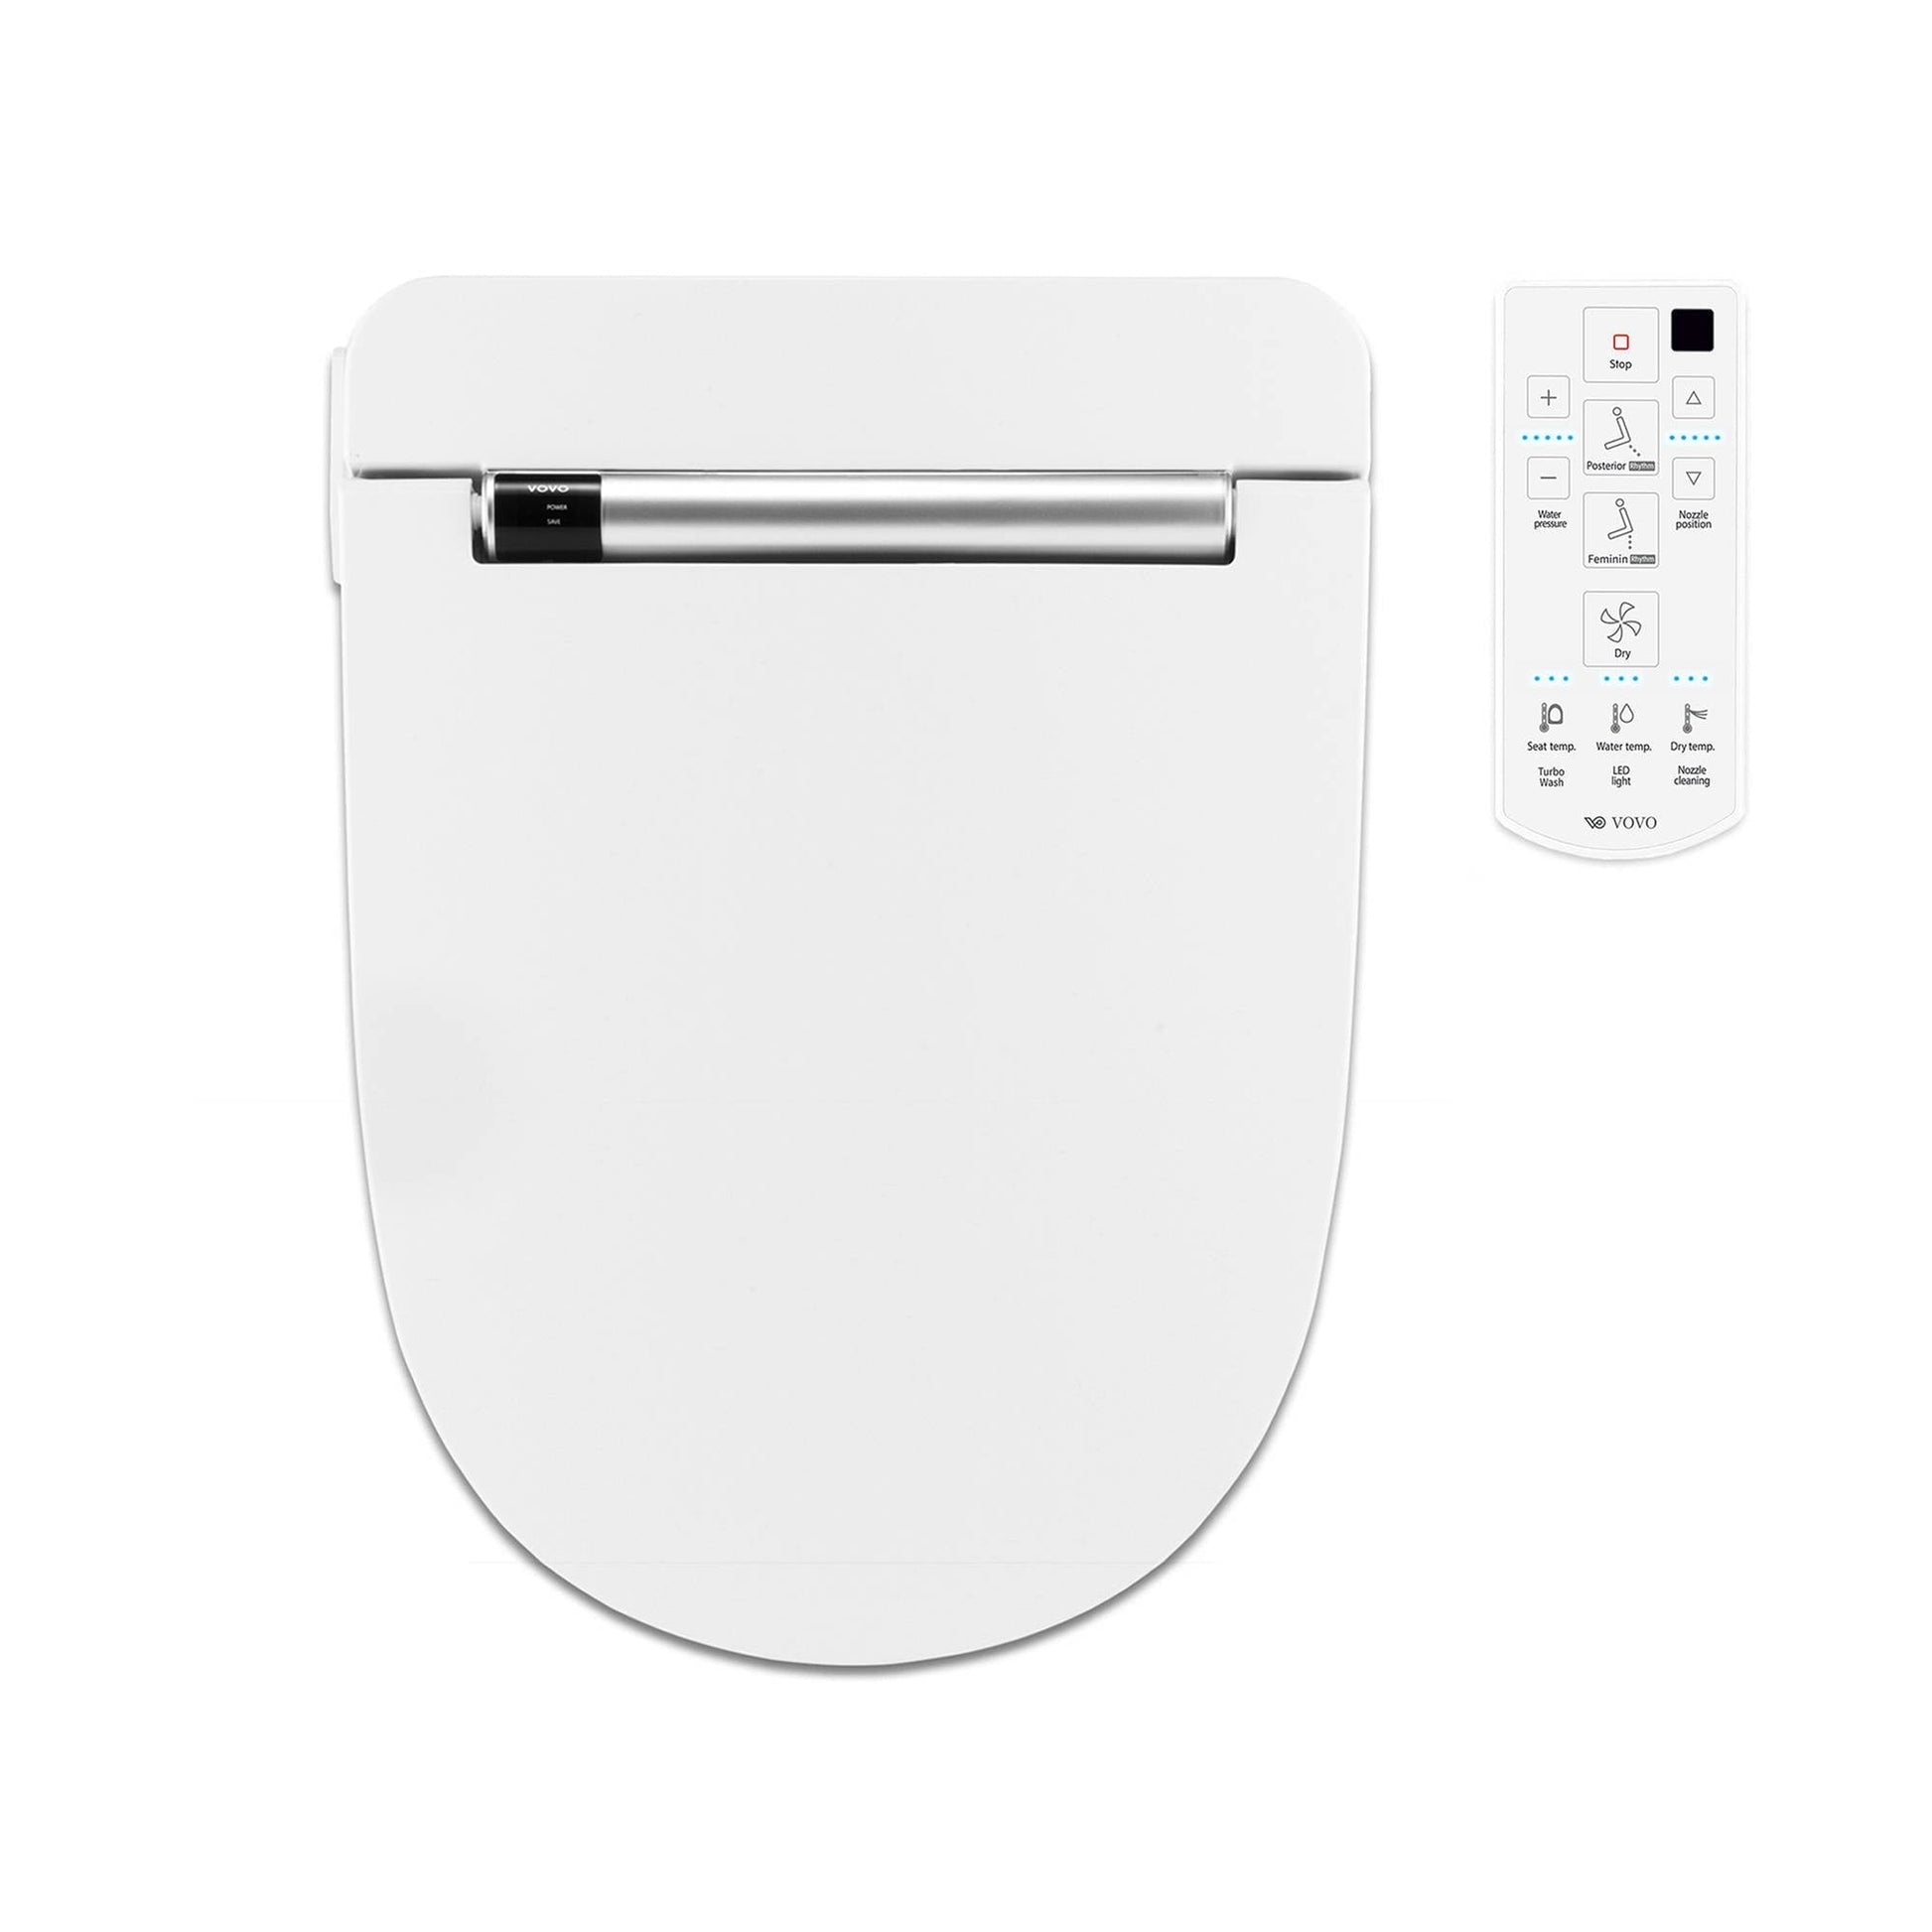 VOVO Stylement VB-4000SE Elongated Electric Premium Smart Bidet Toilet Seat With Wireless Remote Control